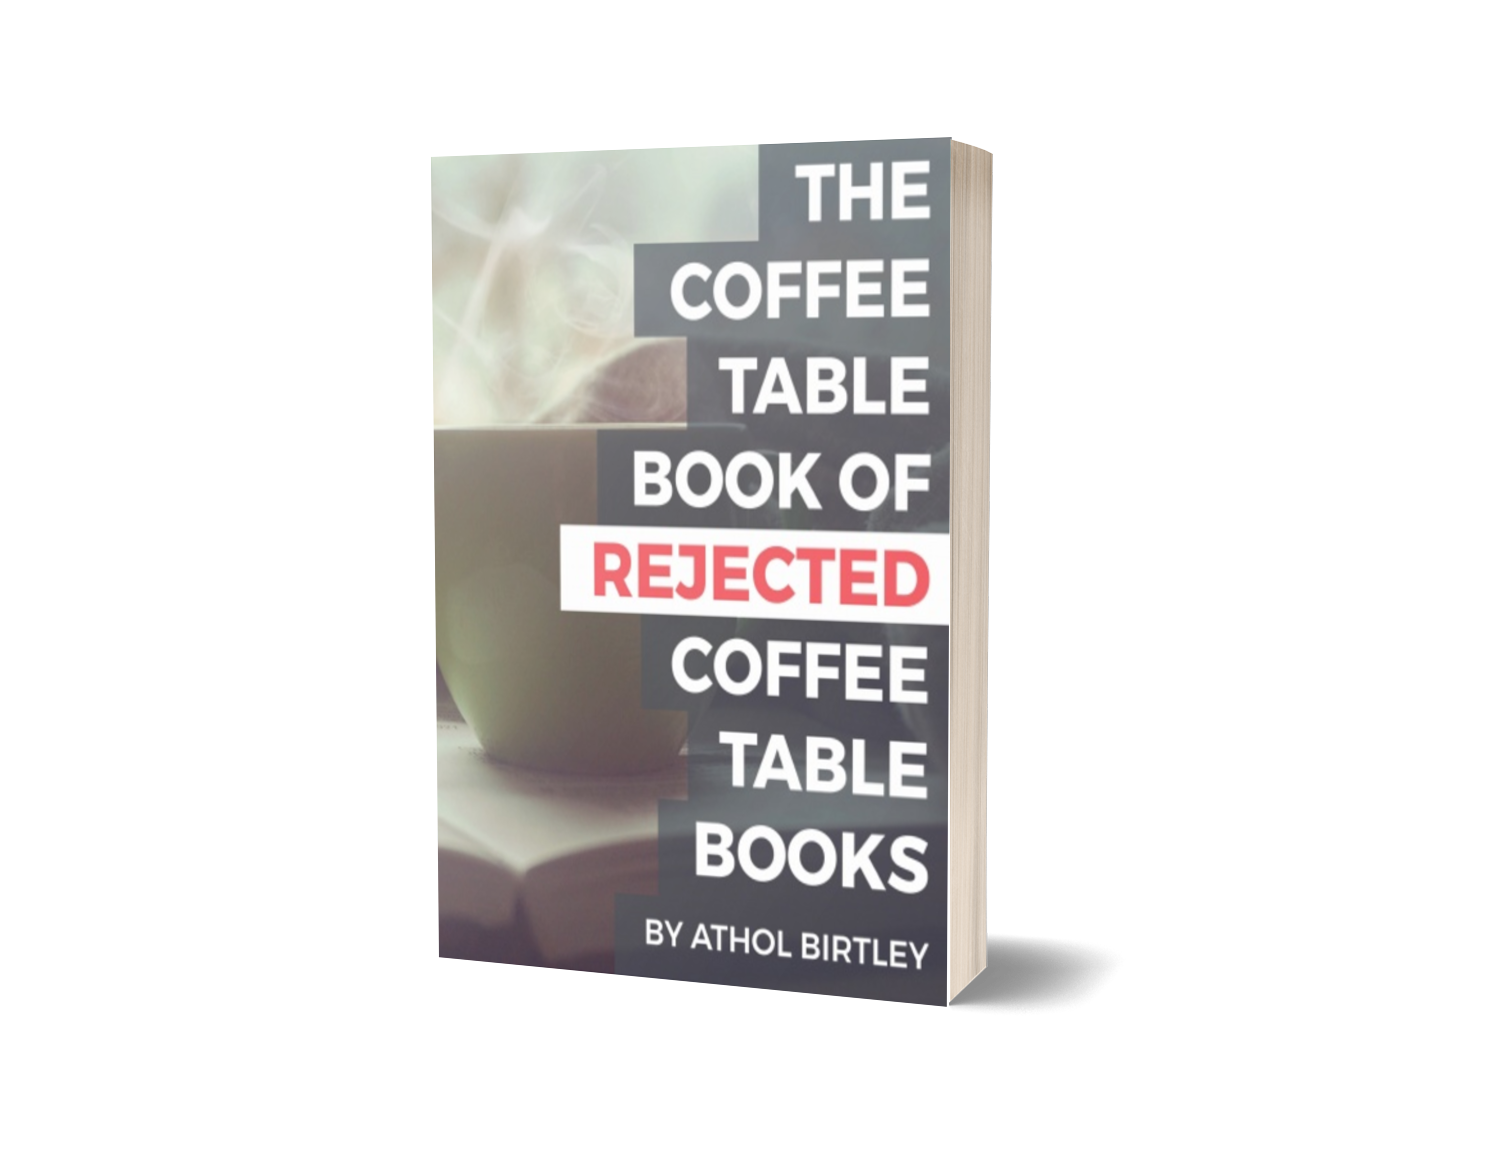 The Coffee Table Book of Rejected Coffee Table Books